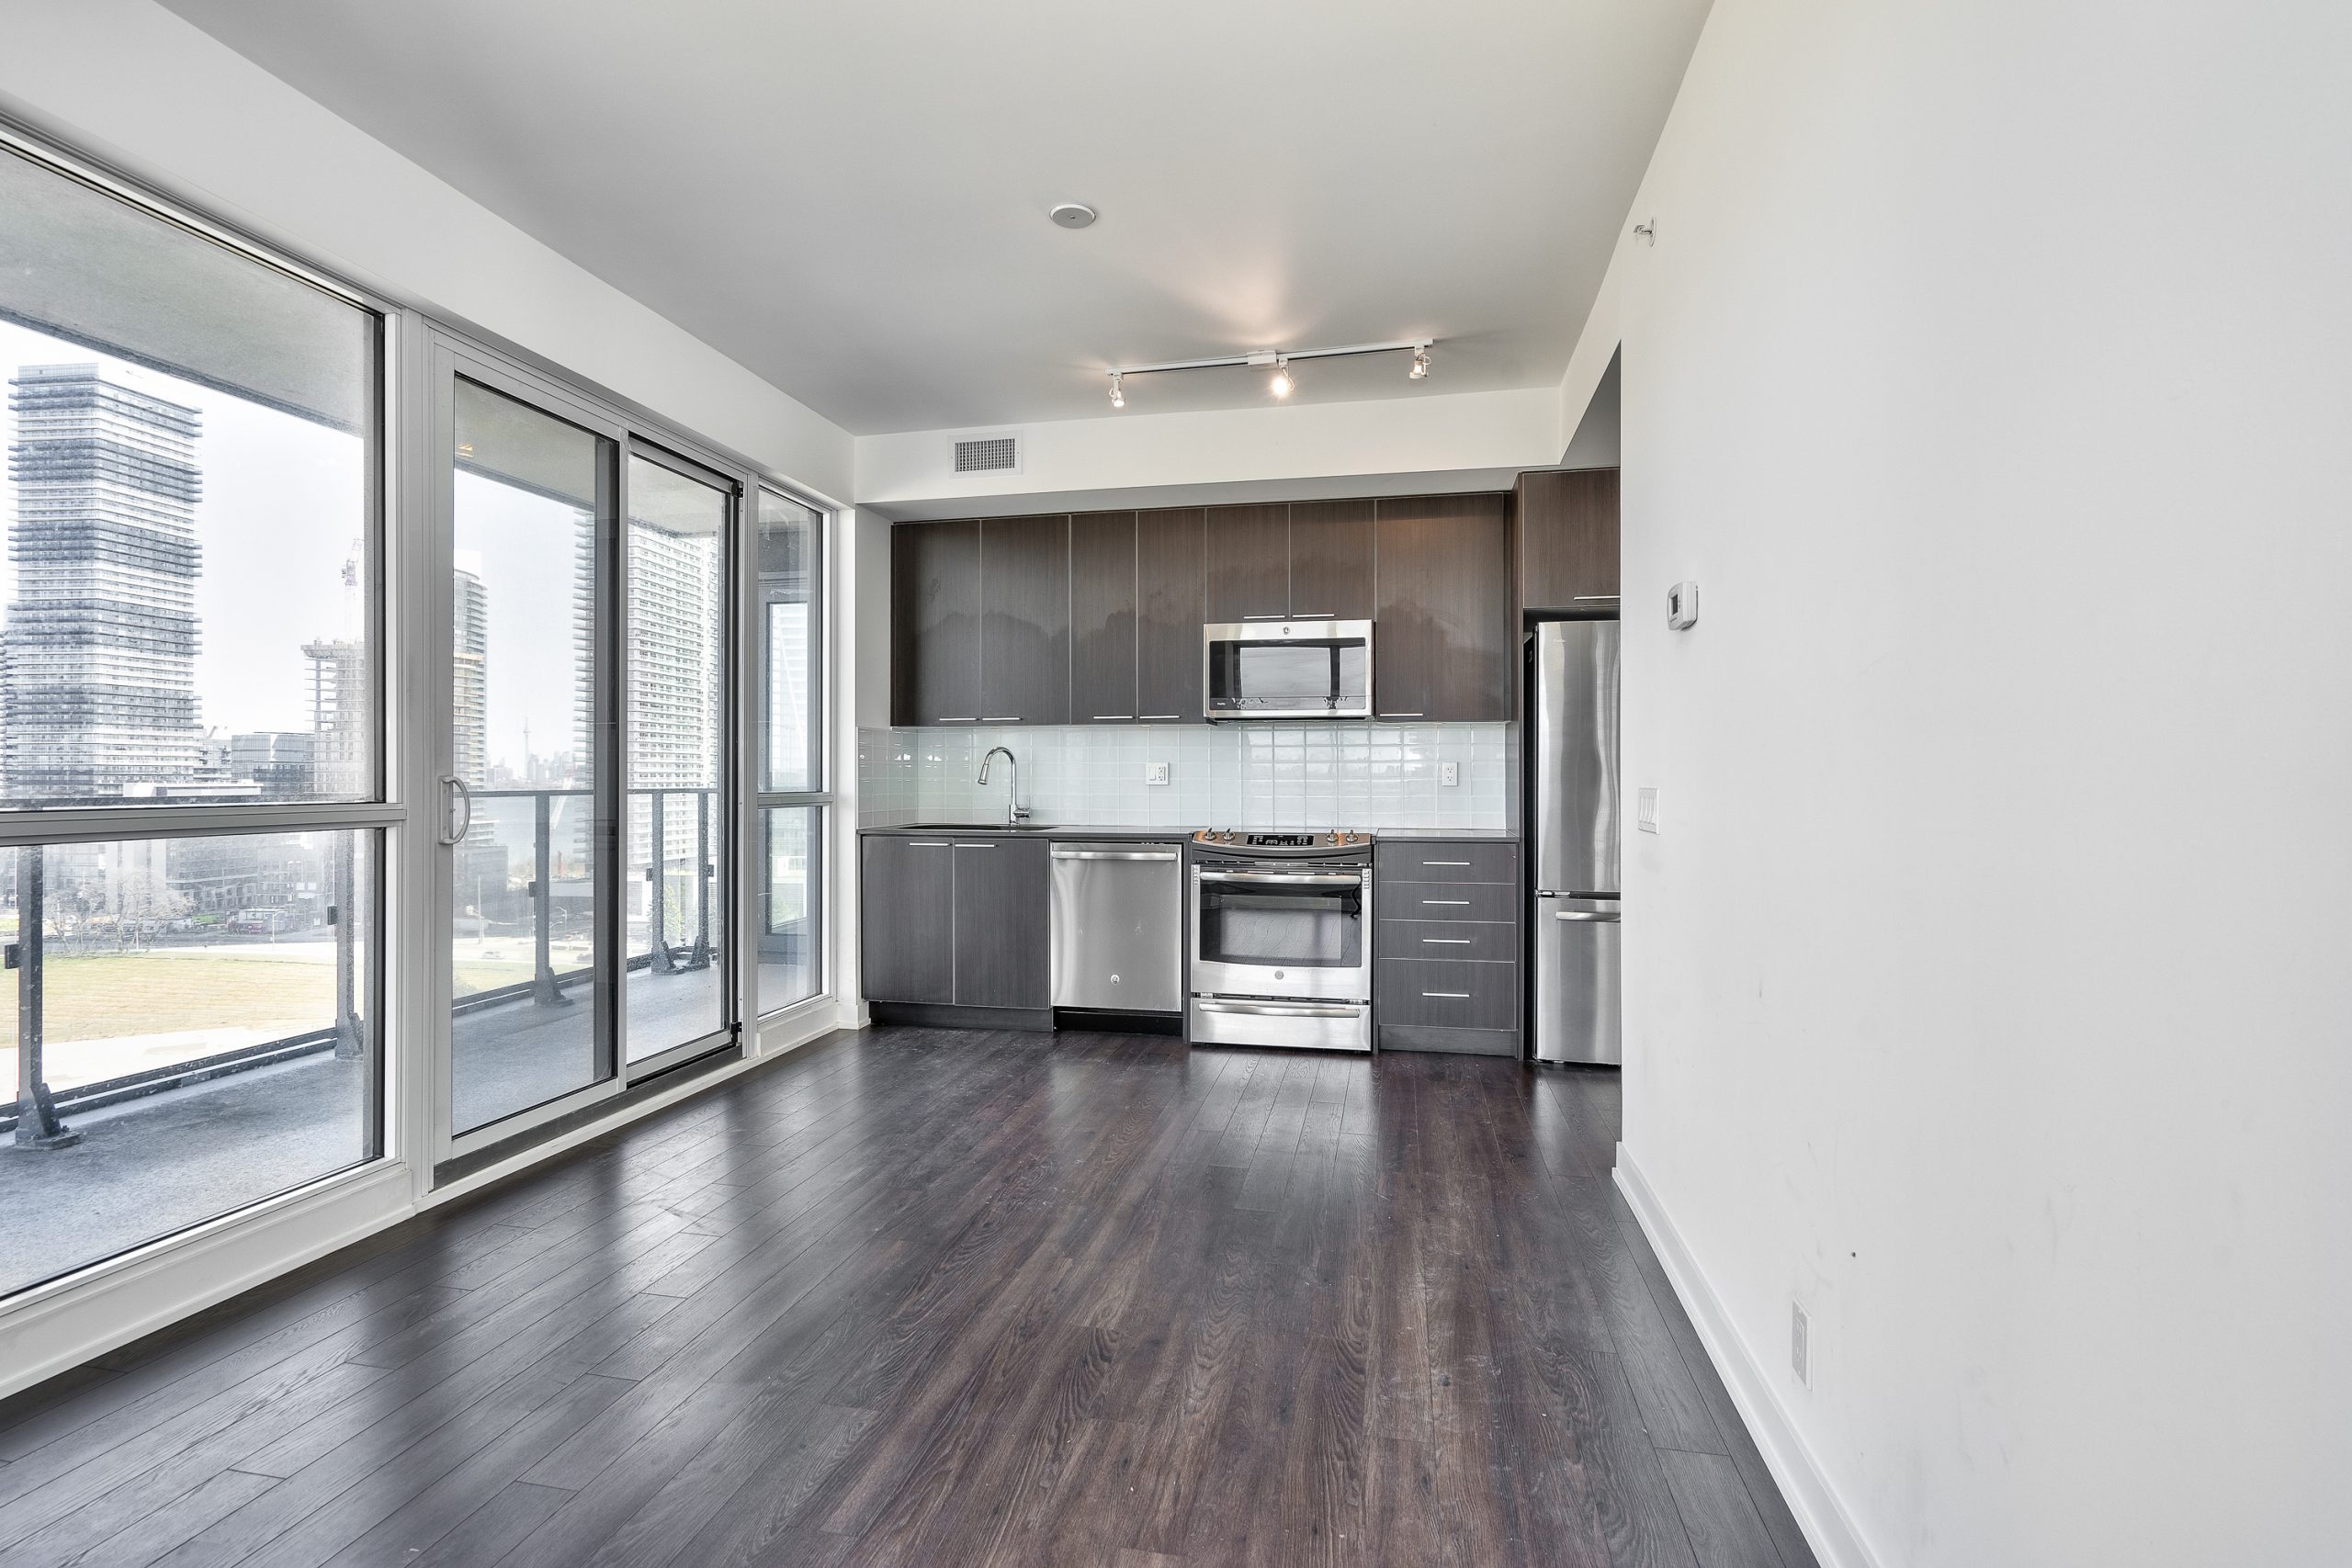 10-park-lawn-rd-westlake-encore-humber-bay-shores--stainless-steel-appliances